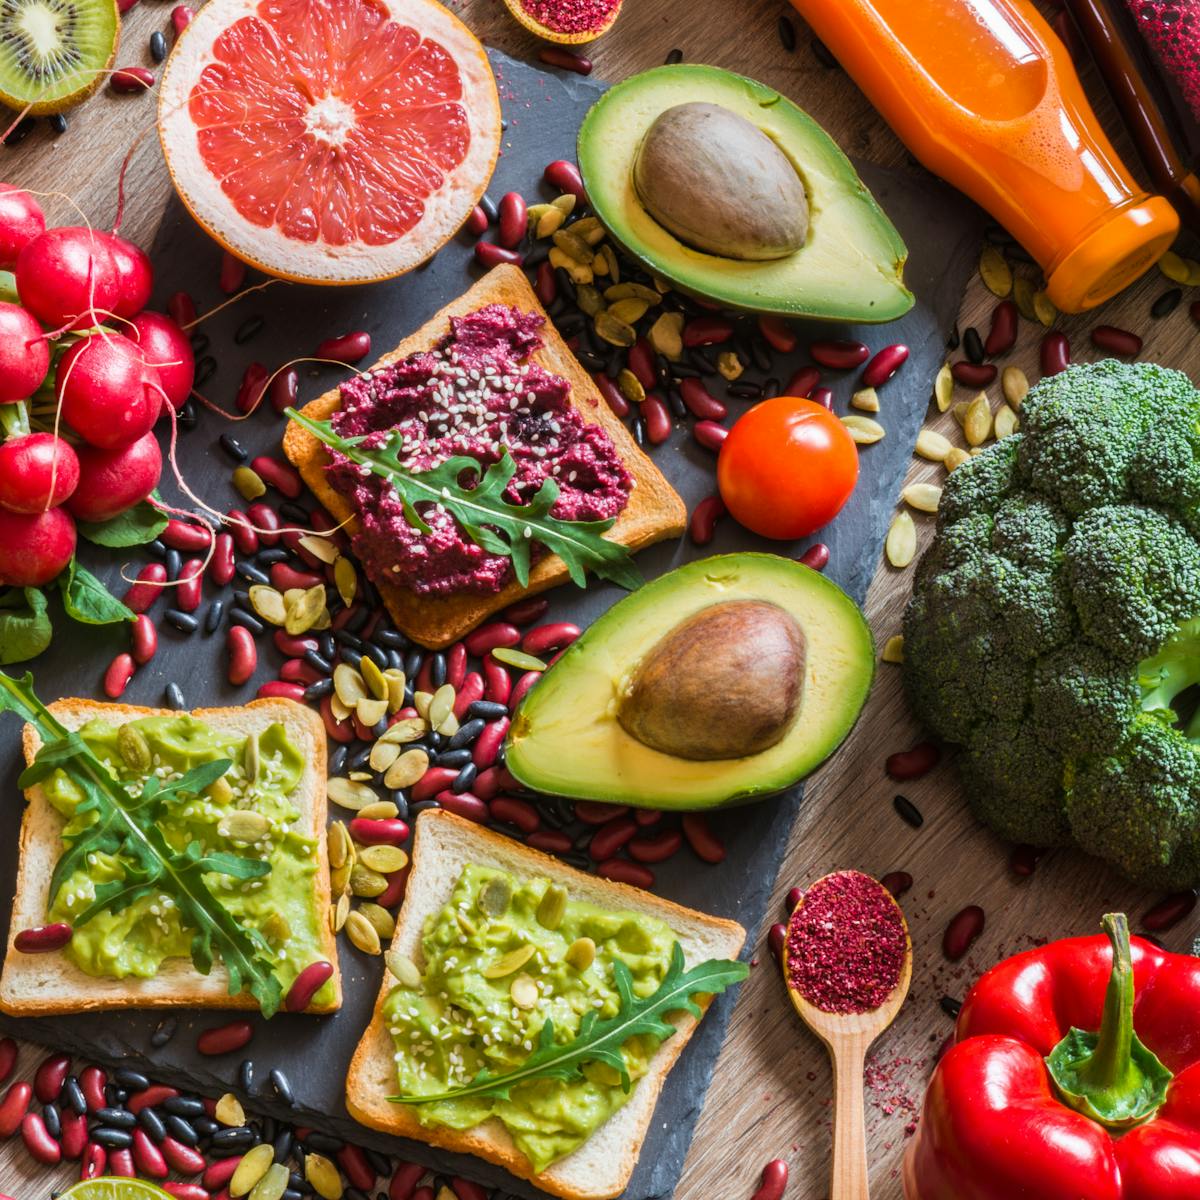 Is a vegan diet healthier? Five reasons why we can't tell sure